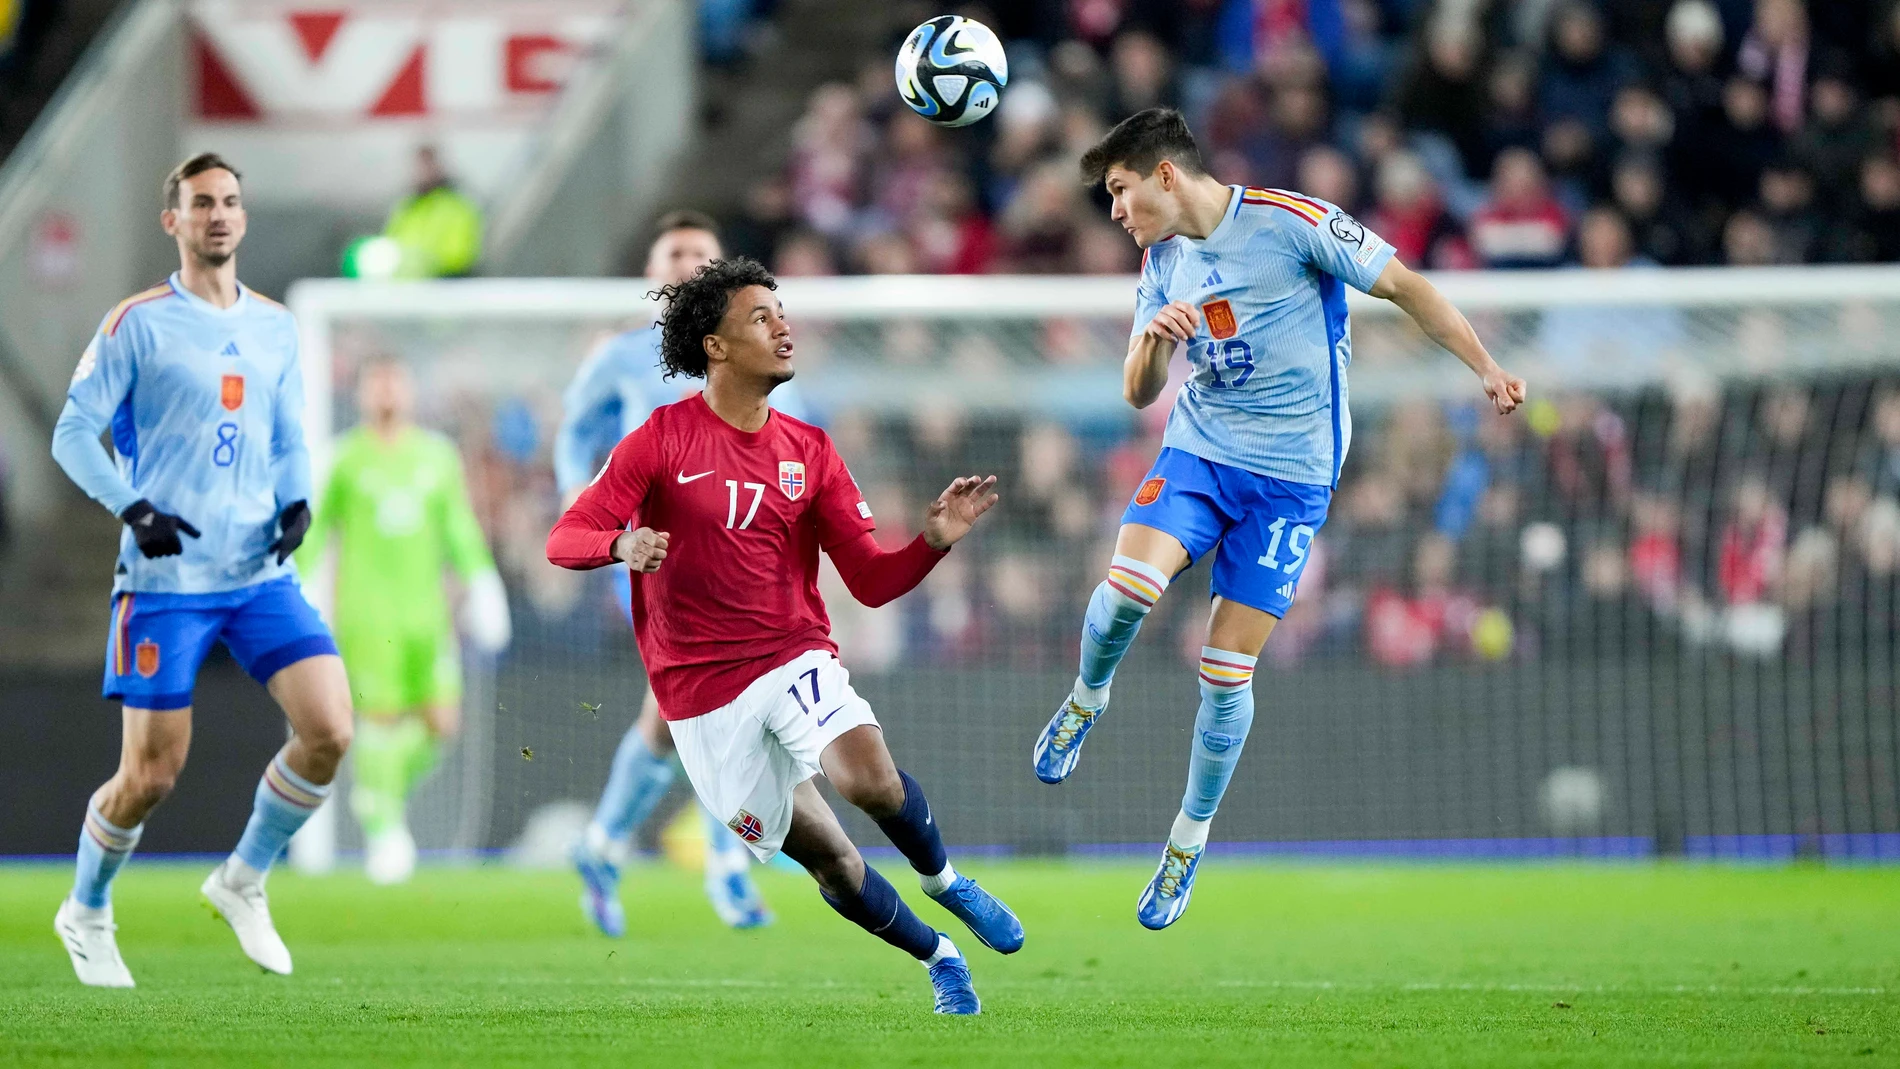 Norway's Oscar Bobb, center, and Spain's Fran García in action during the Euro 2024 group A qualifying soccer match between Norway and Spain at the Ullevaal Stadium in Oslo, Norway, Sunday Oct. 15, 2023. (Fredrik Varfjell/NTB Scanpix via AP)